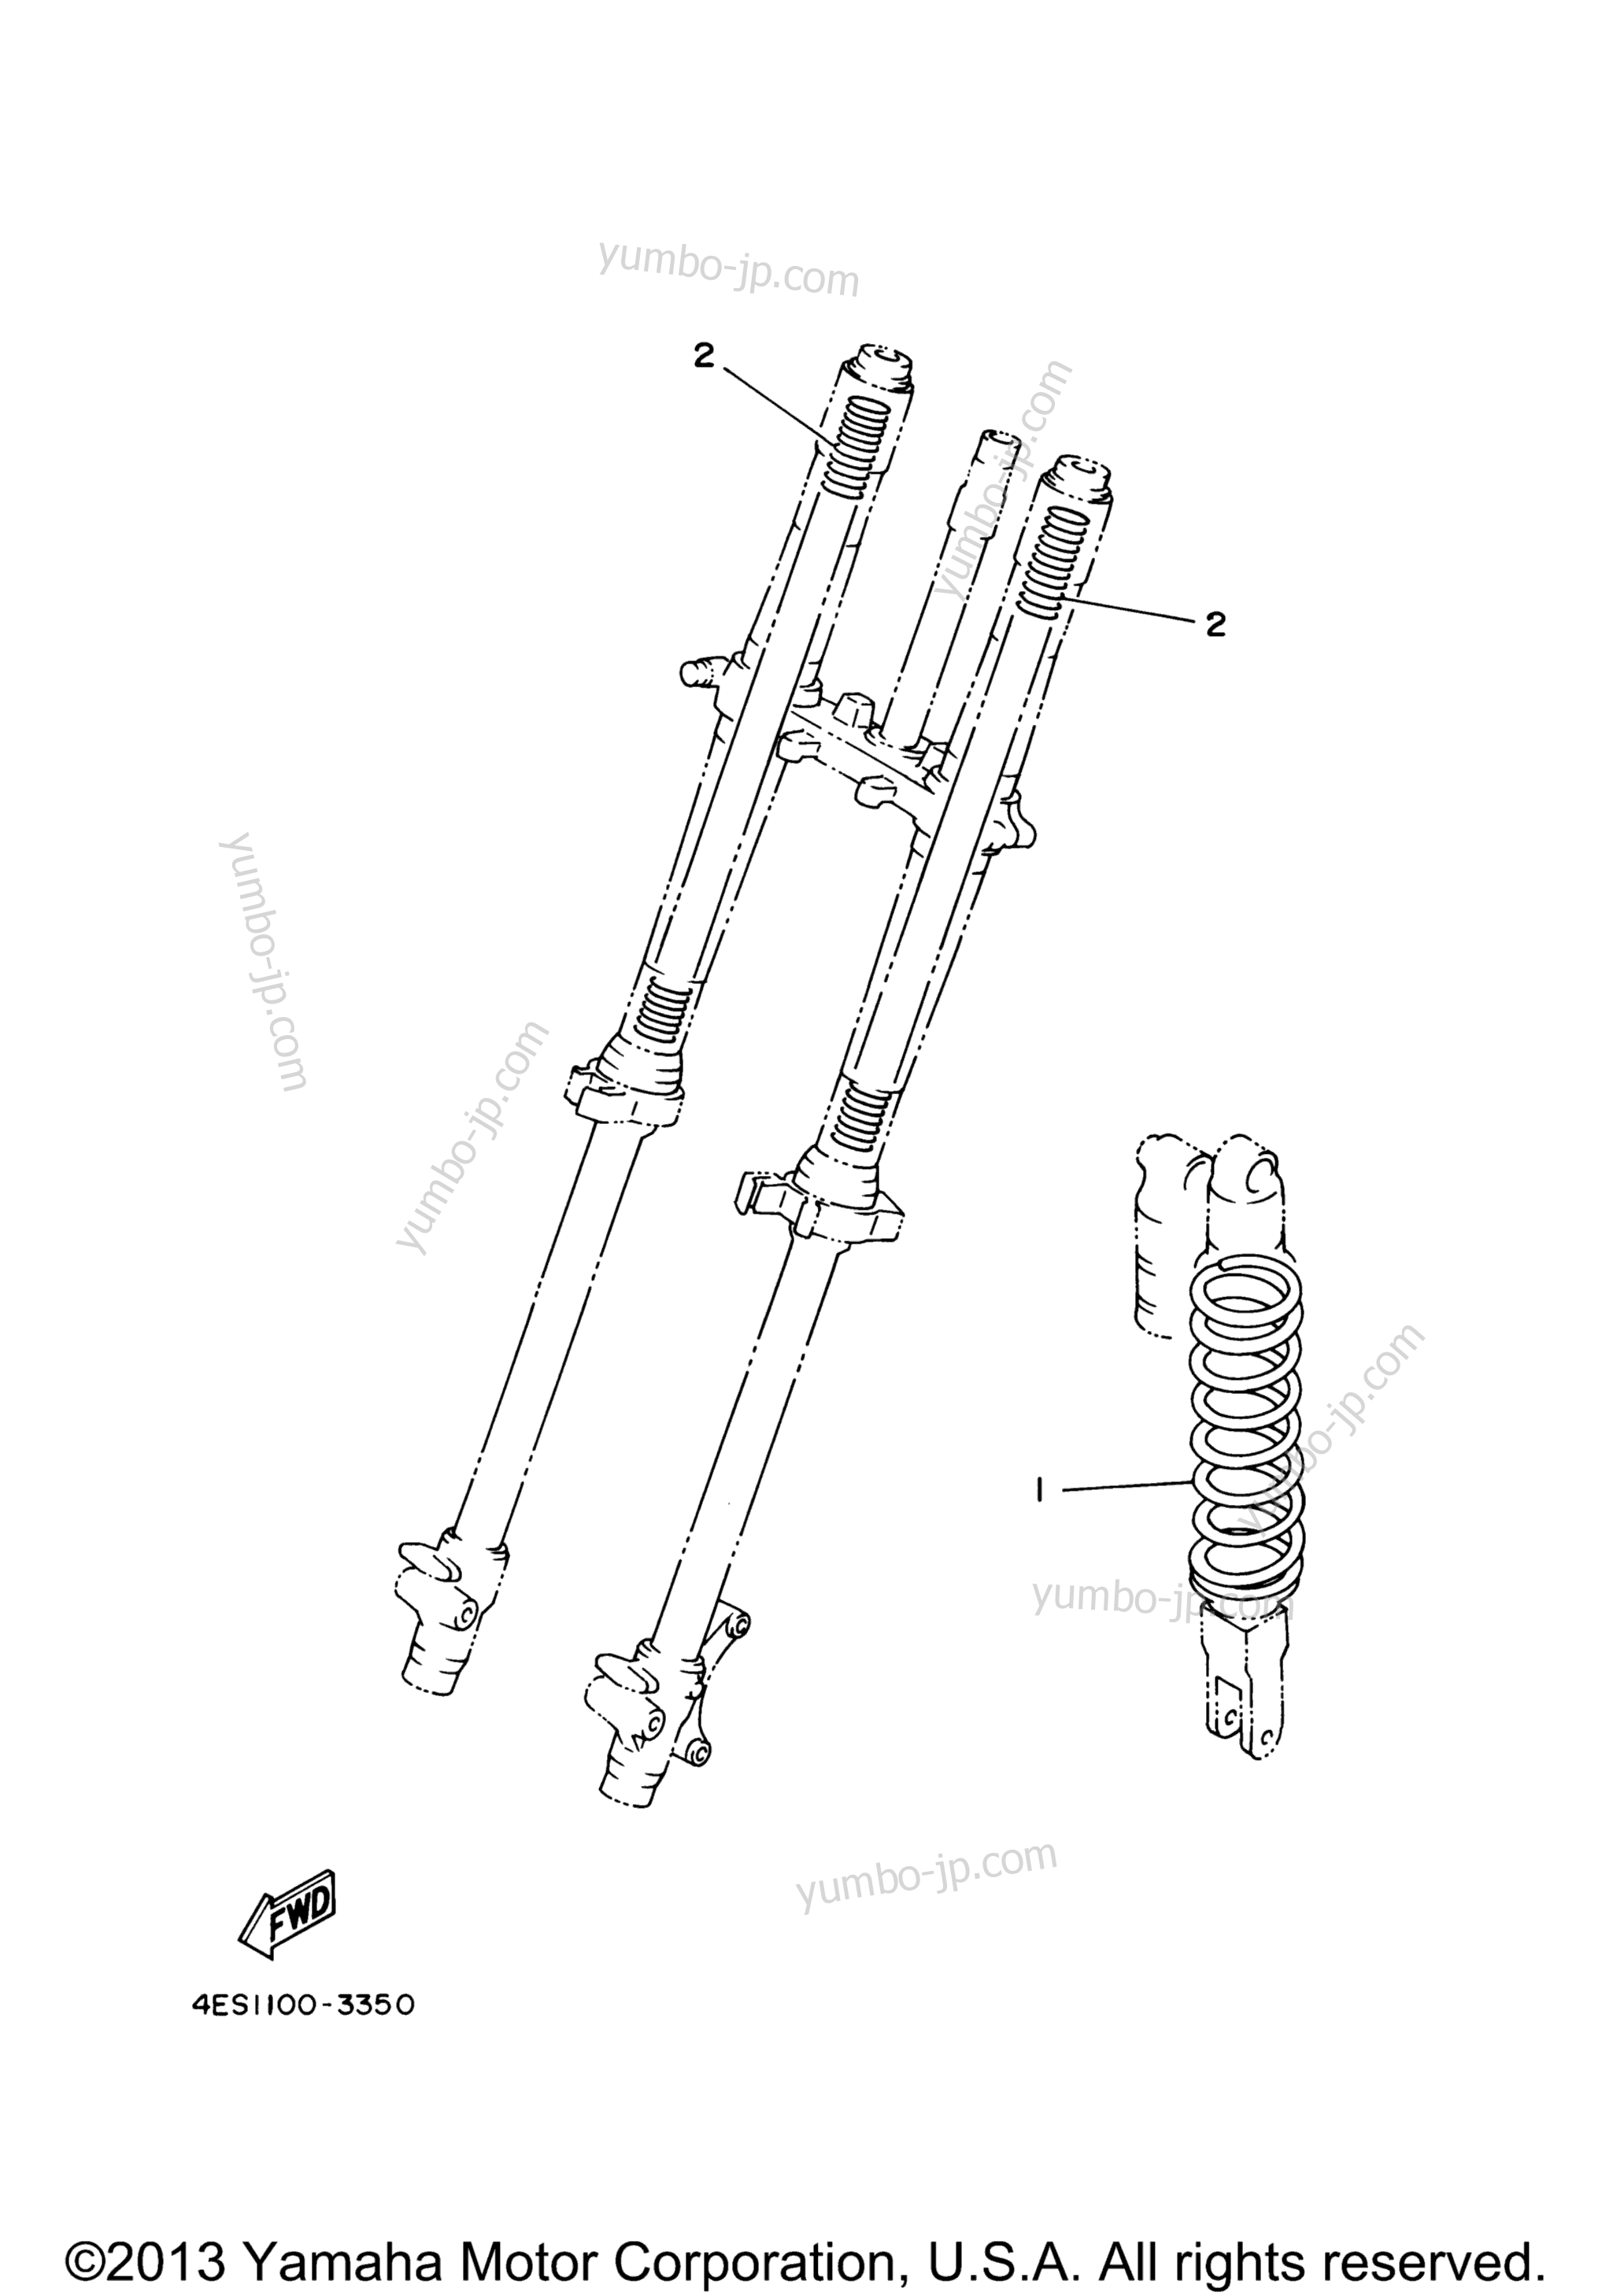 Alternate For Chassis for motorcycles YAMAHA YZ85 (YZ85Y) 2009 year